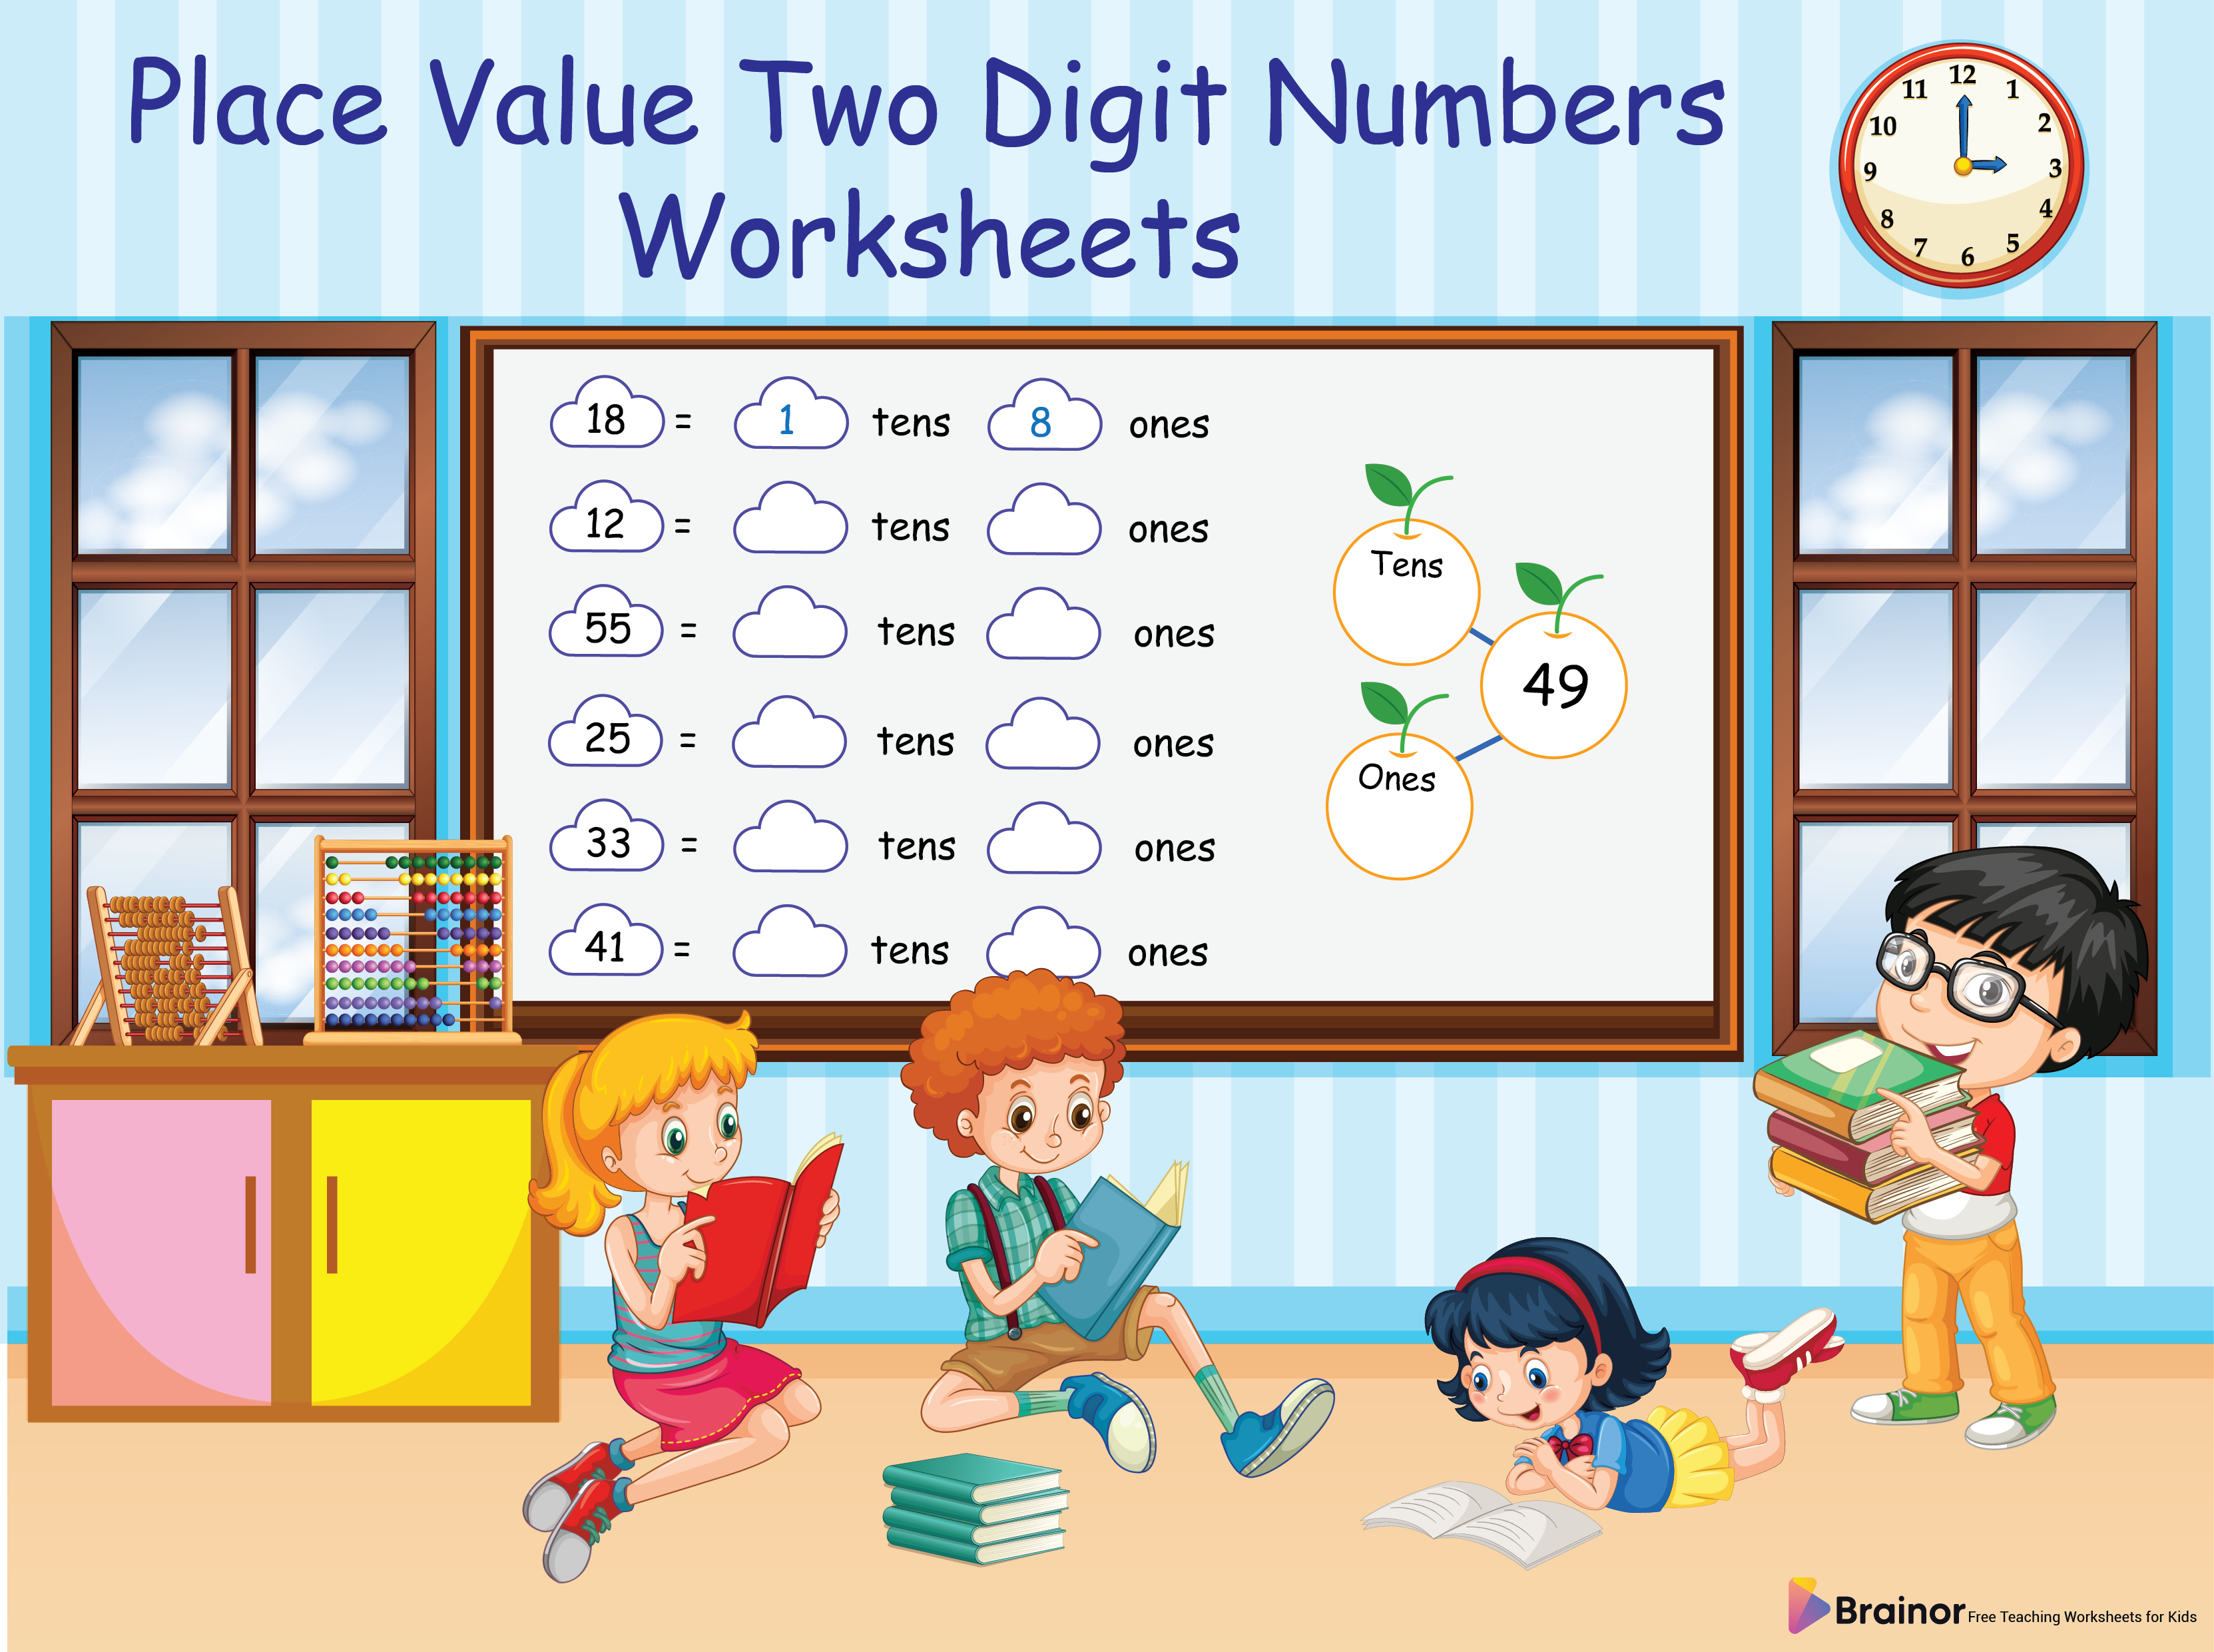 Place Value Two Digit Numbers Worksheets